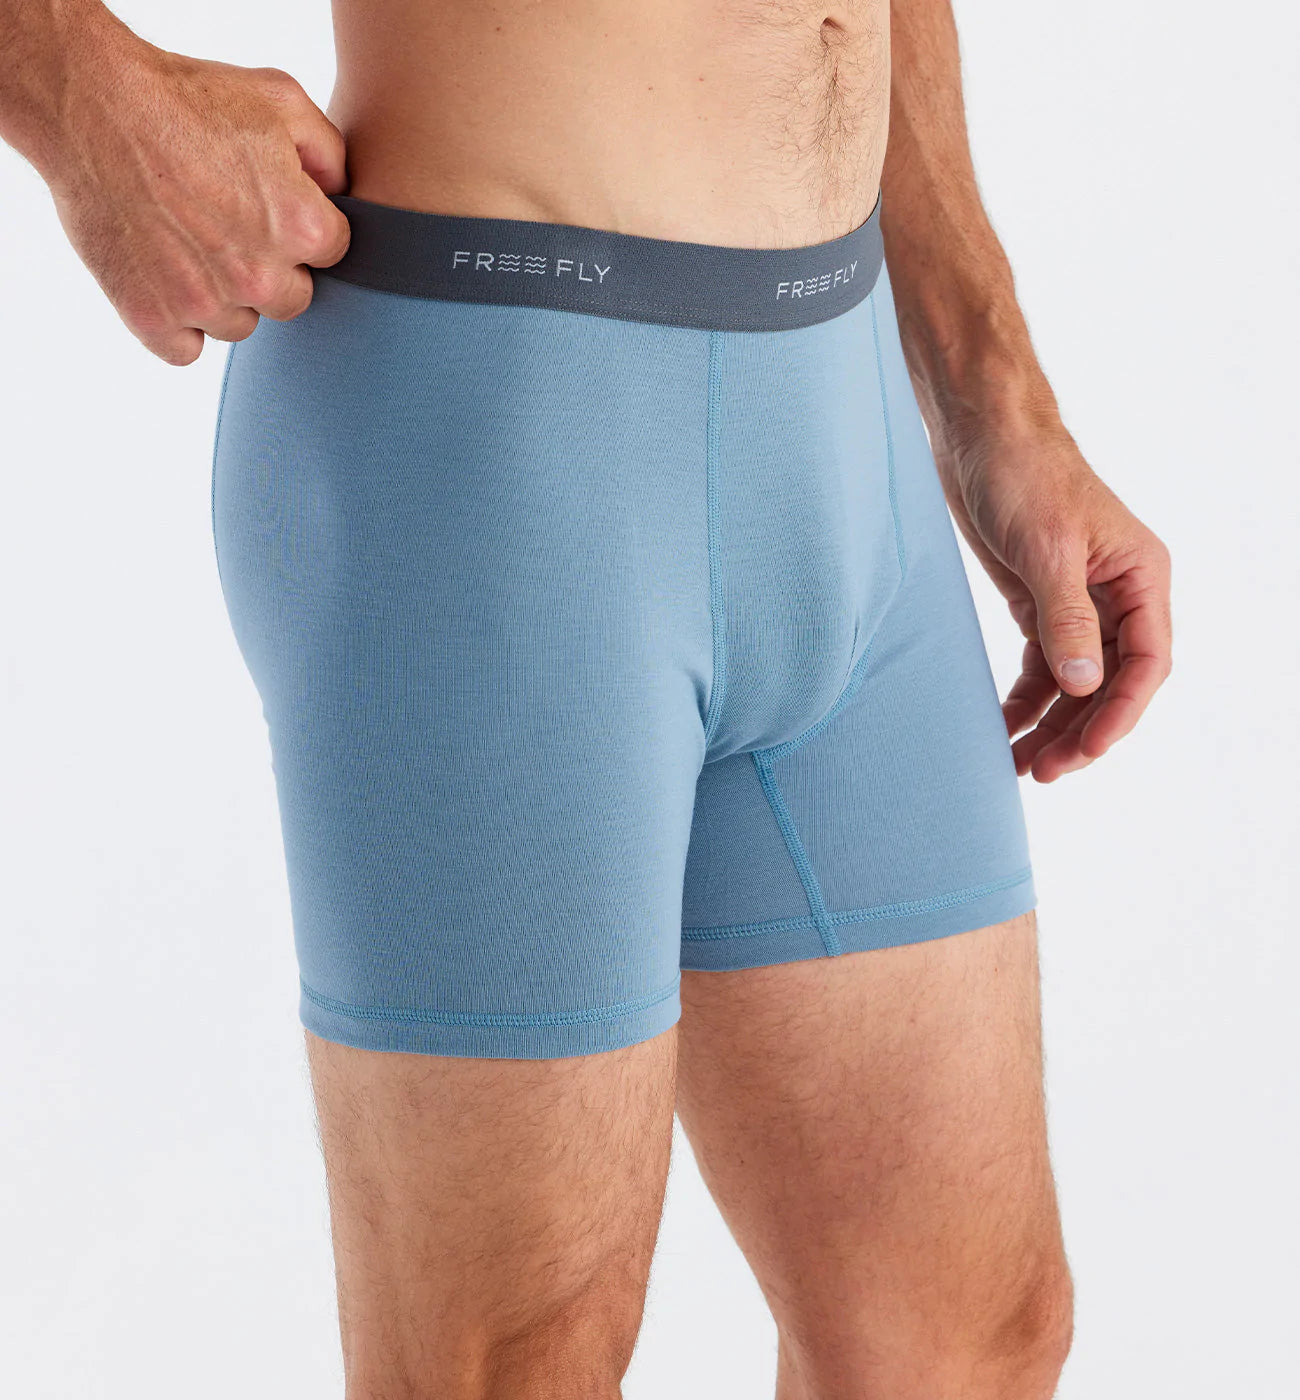 Baby blue underwear for men made from bamboo for everyday comfort